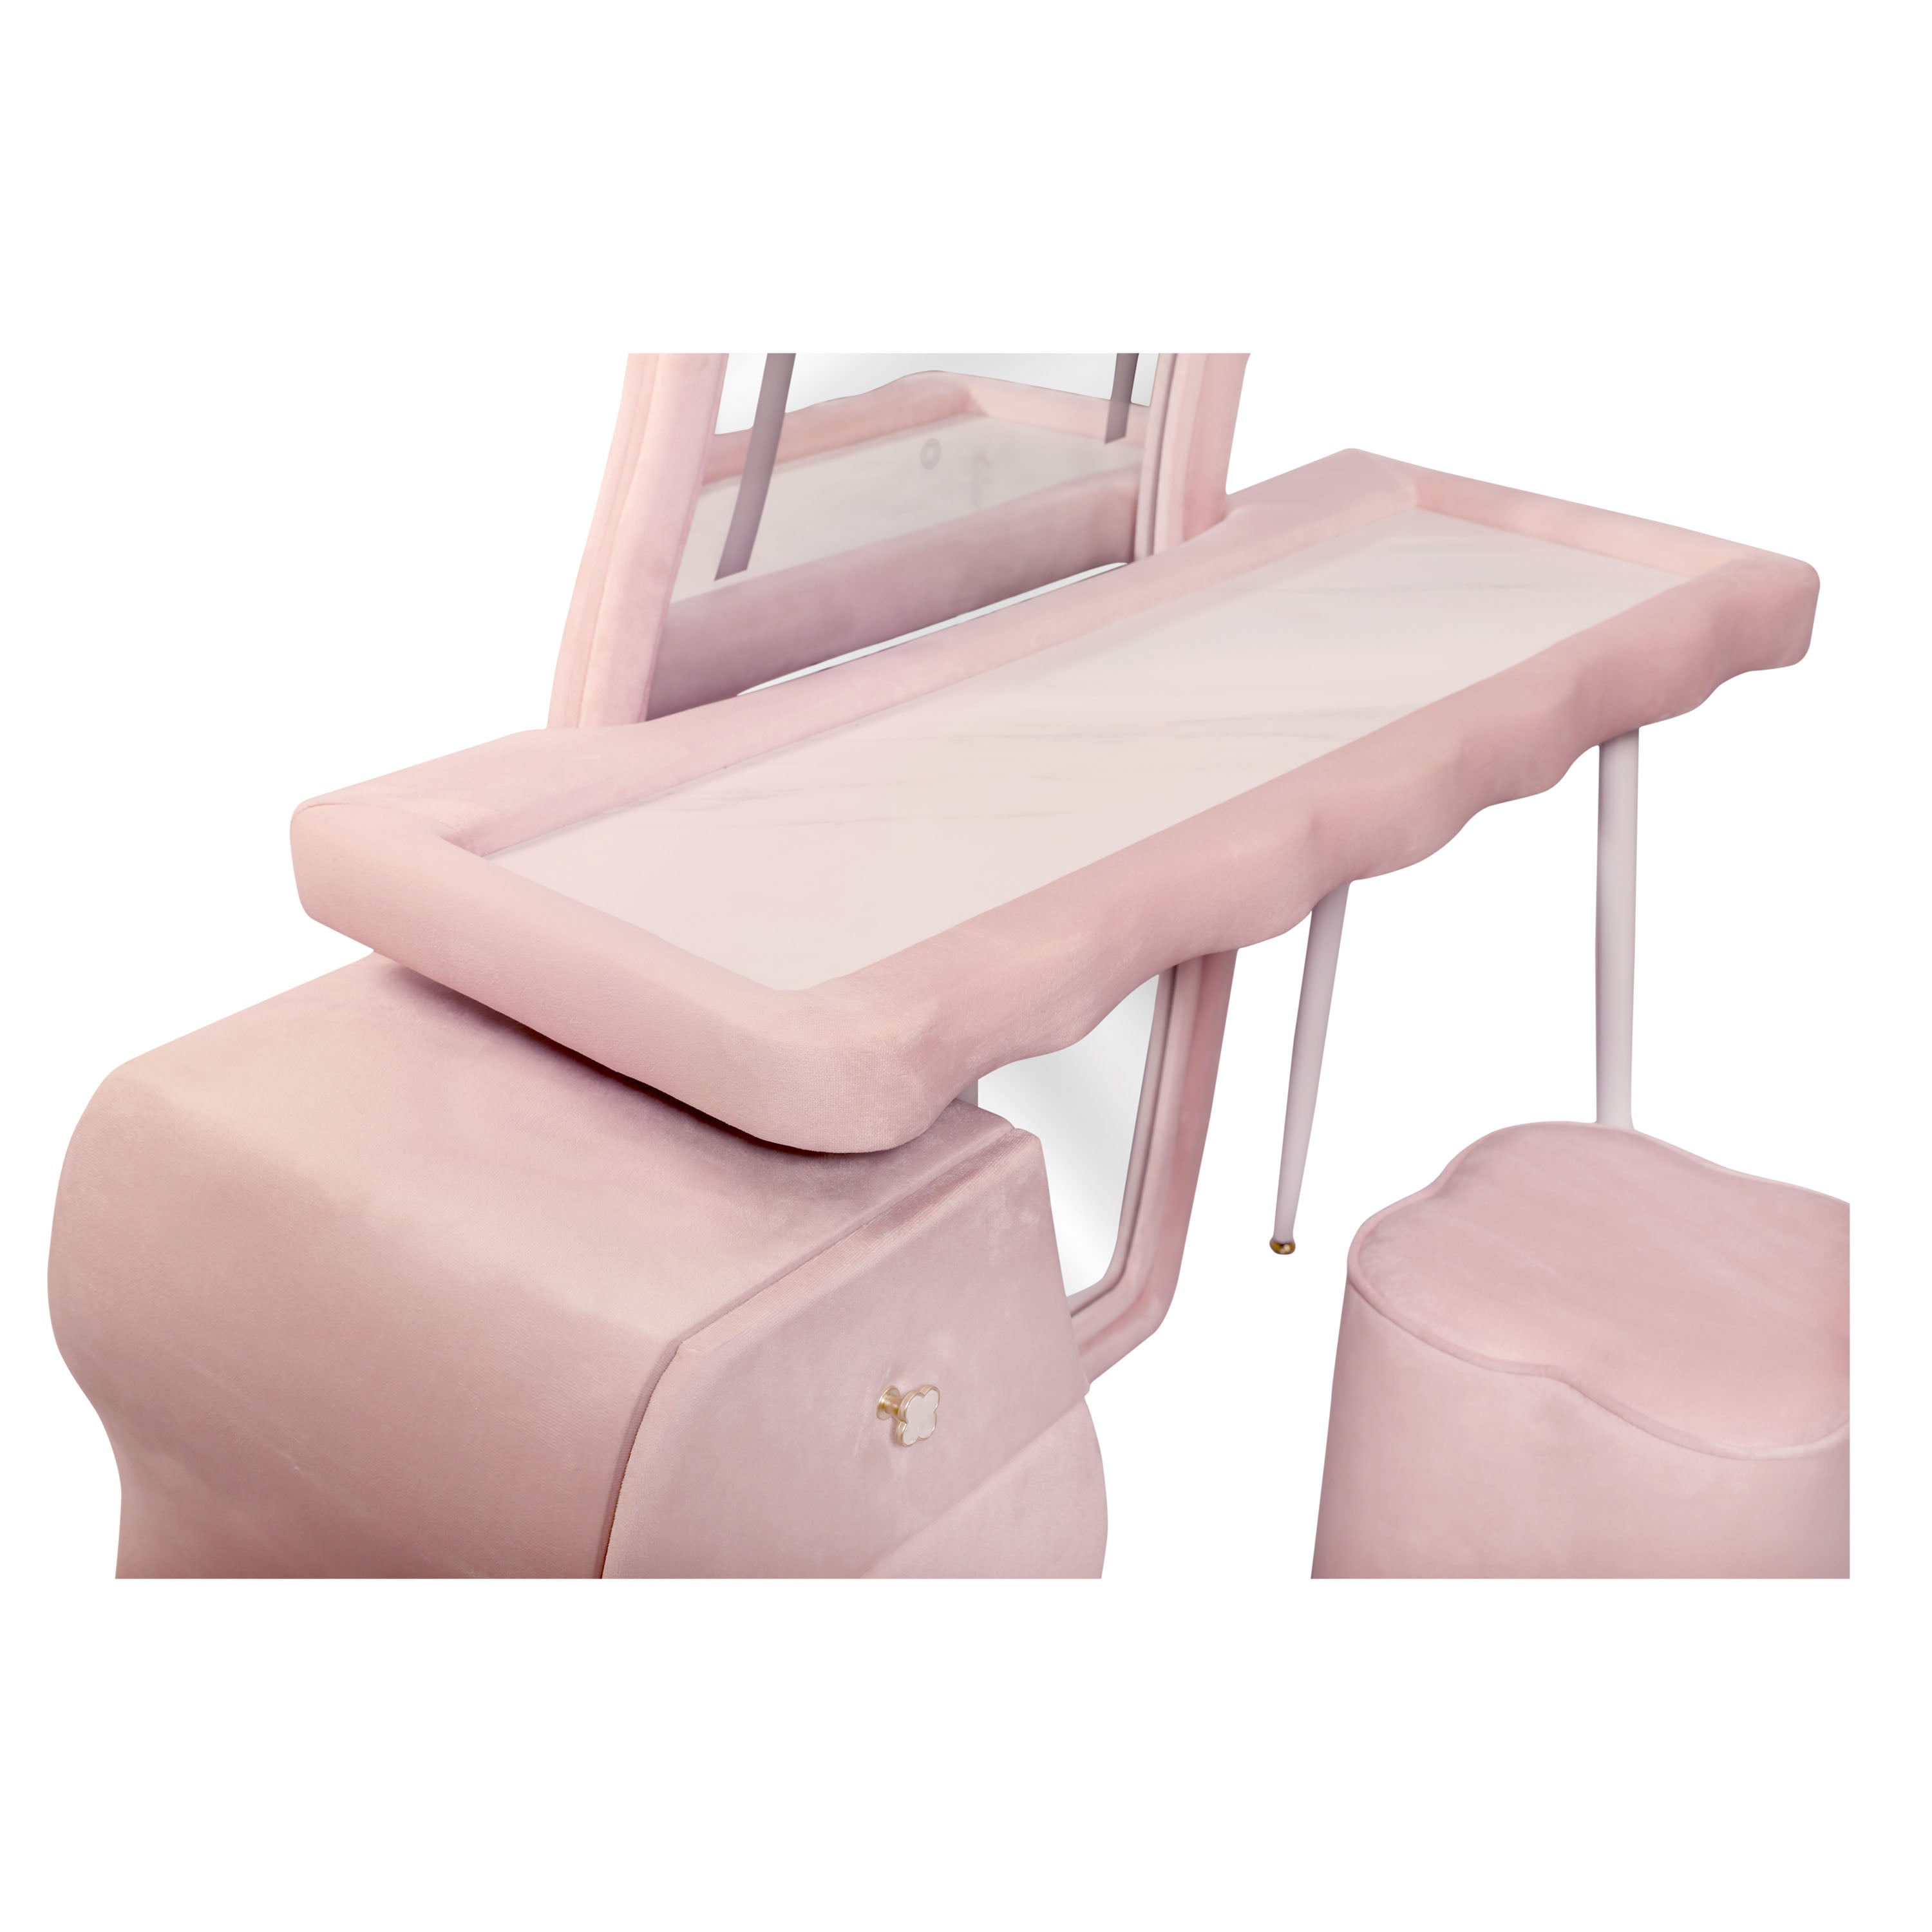 Flamingo Dressing Table with Lighted Mirror, Vanity Set with 3 Drawers and Cushioned Stool, Pink Modern Vanity Table Bedroom Furniture Dresser - Pink